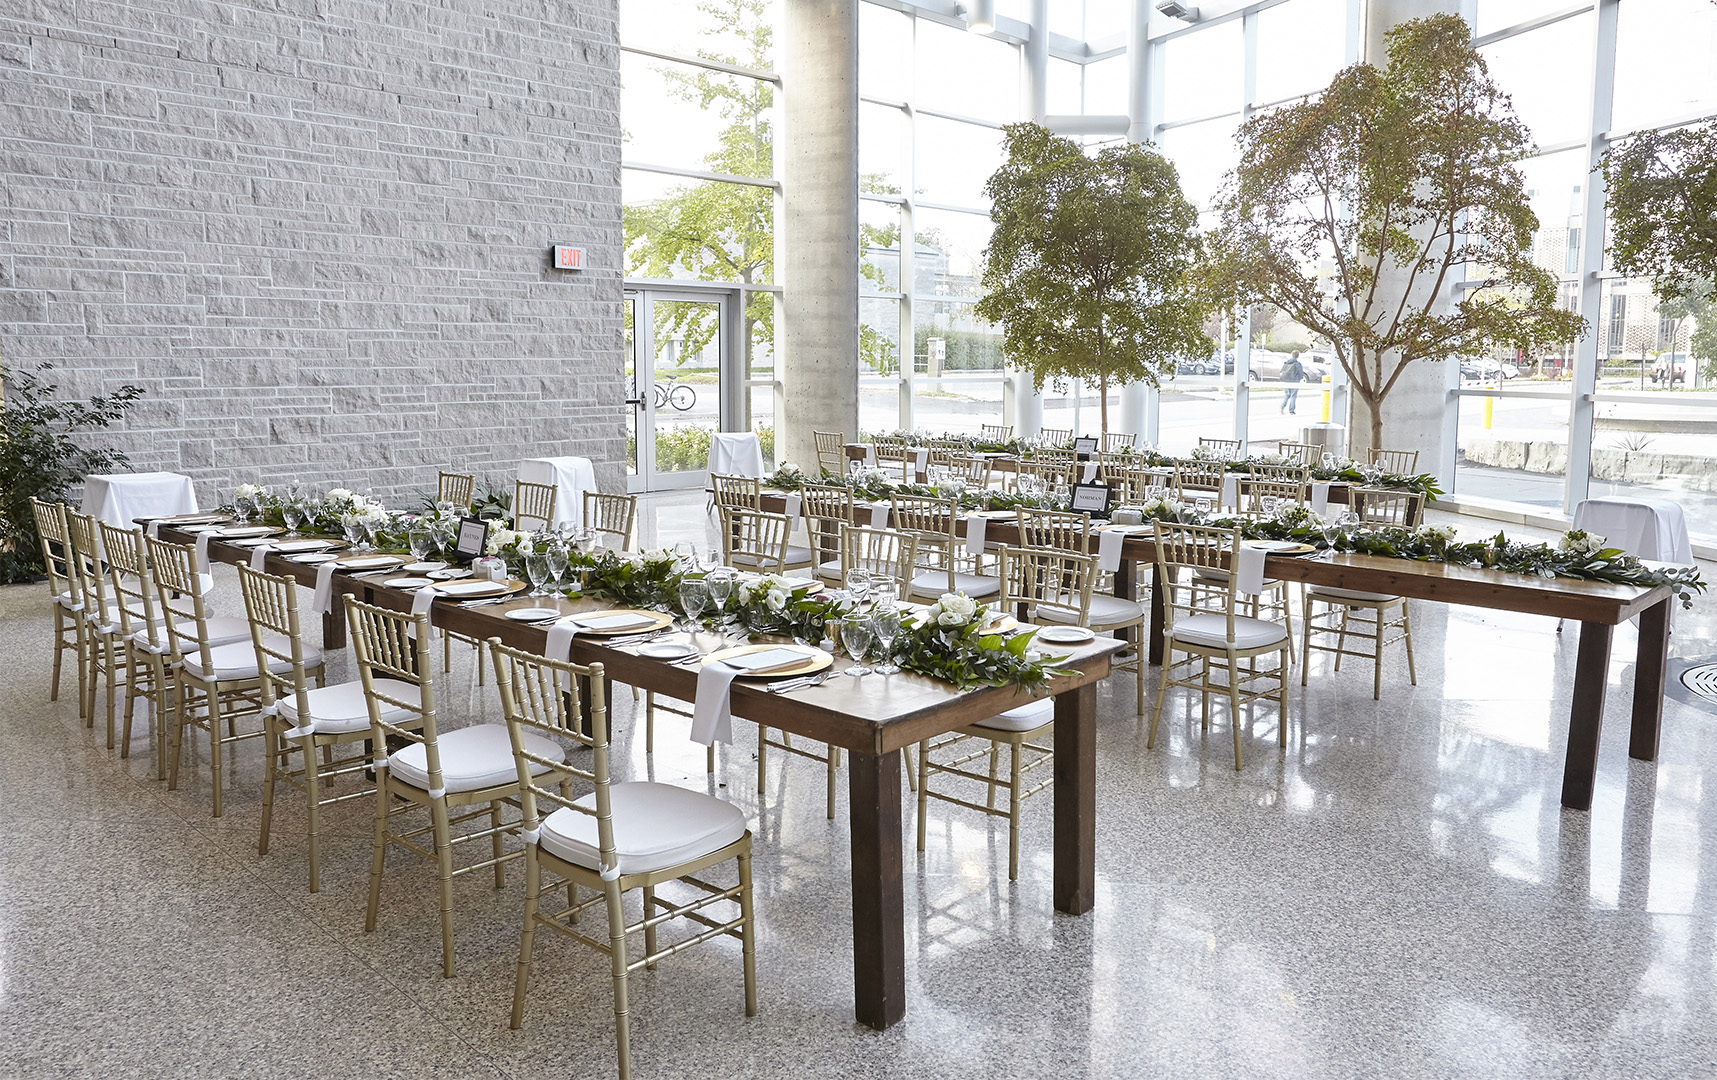 Table setting at an event in the MDCL Atrium